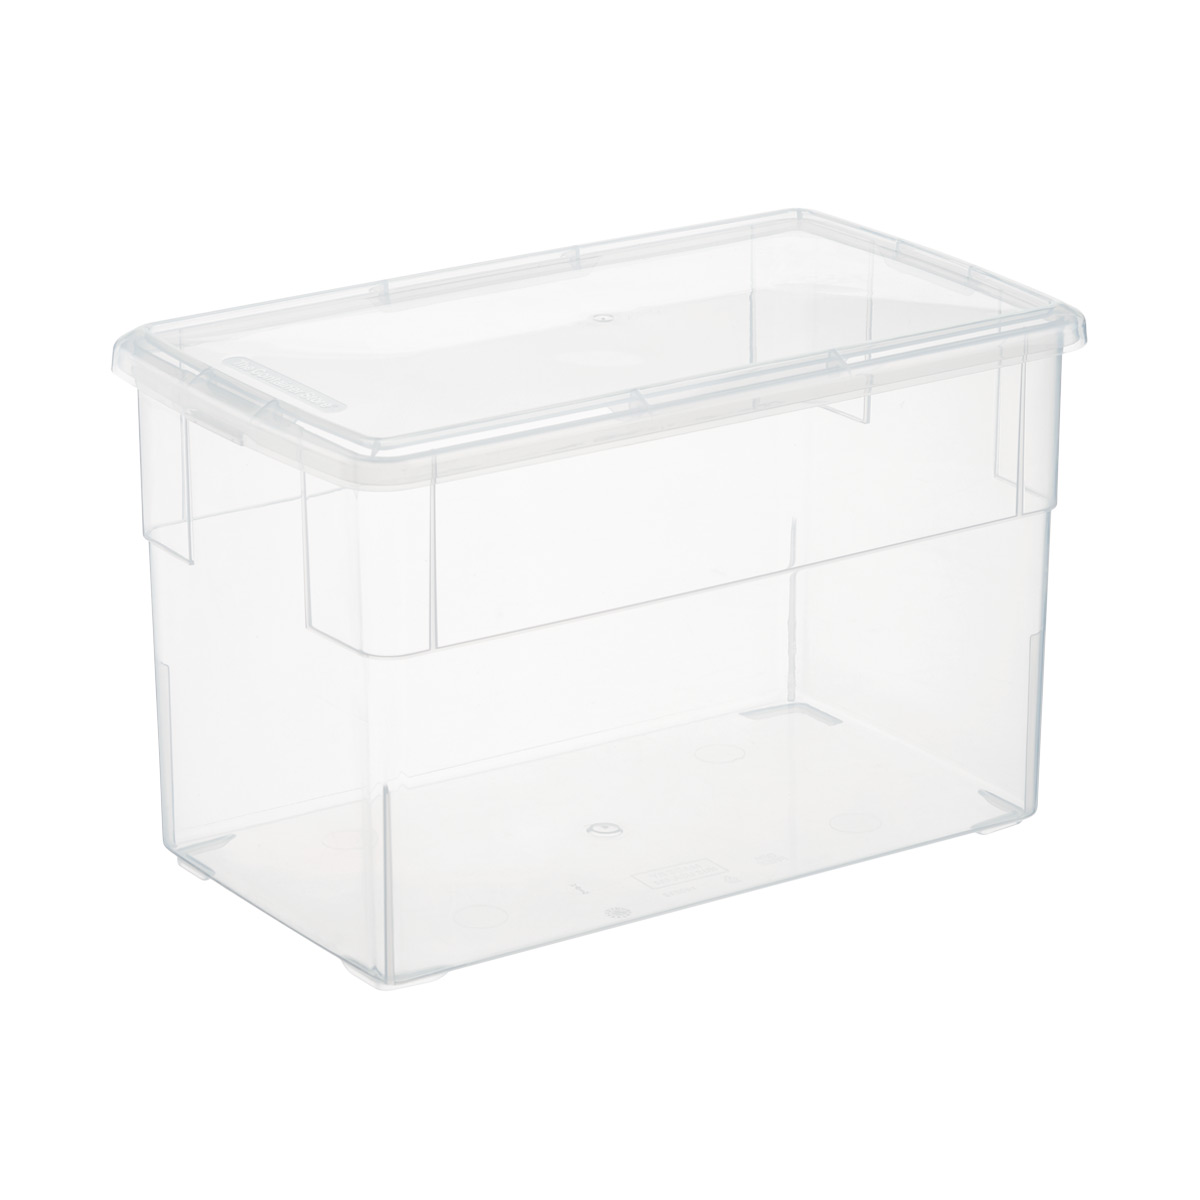 Details about   1pcs Rectangular Plastic Clear W/ Lid Storage Box Collection Container Case 